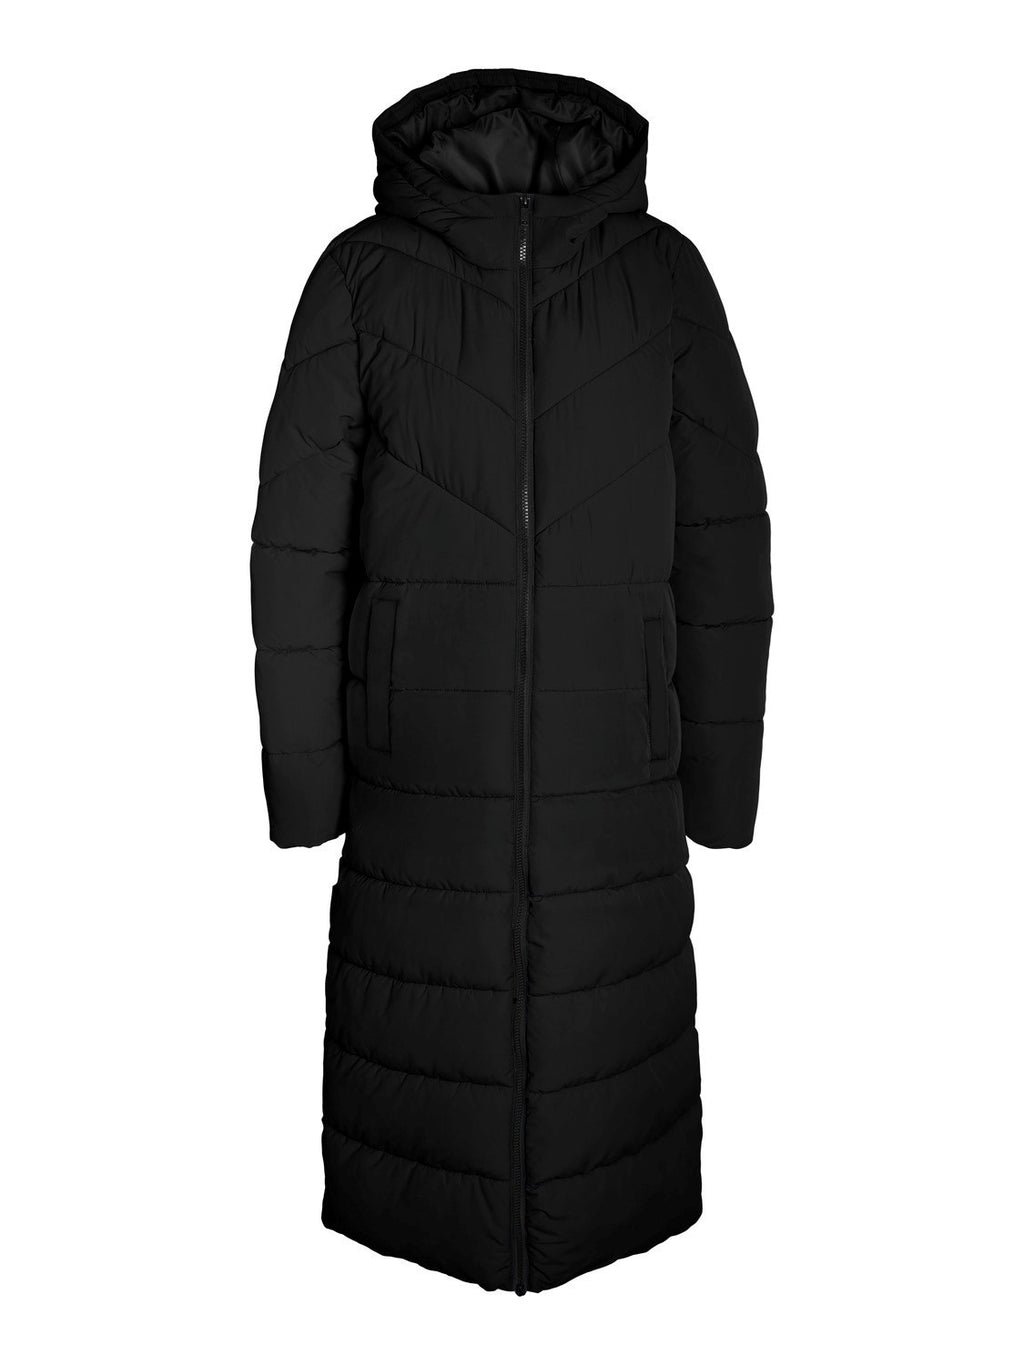 Noisy May Dalcon long puffer coat featuring - Fixed hood - 2-way zip-up front - Long sleeves - Front patch pockets - Quilted design - Long length - Regular fit